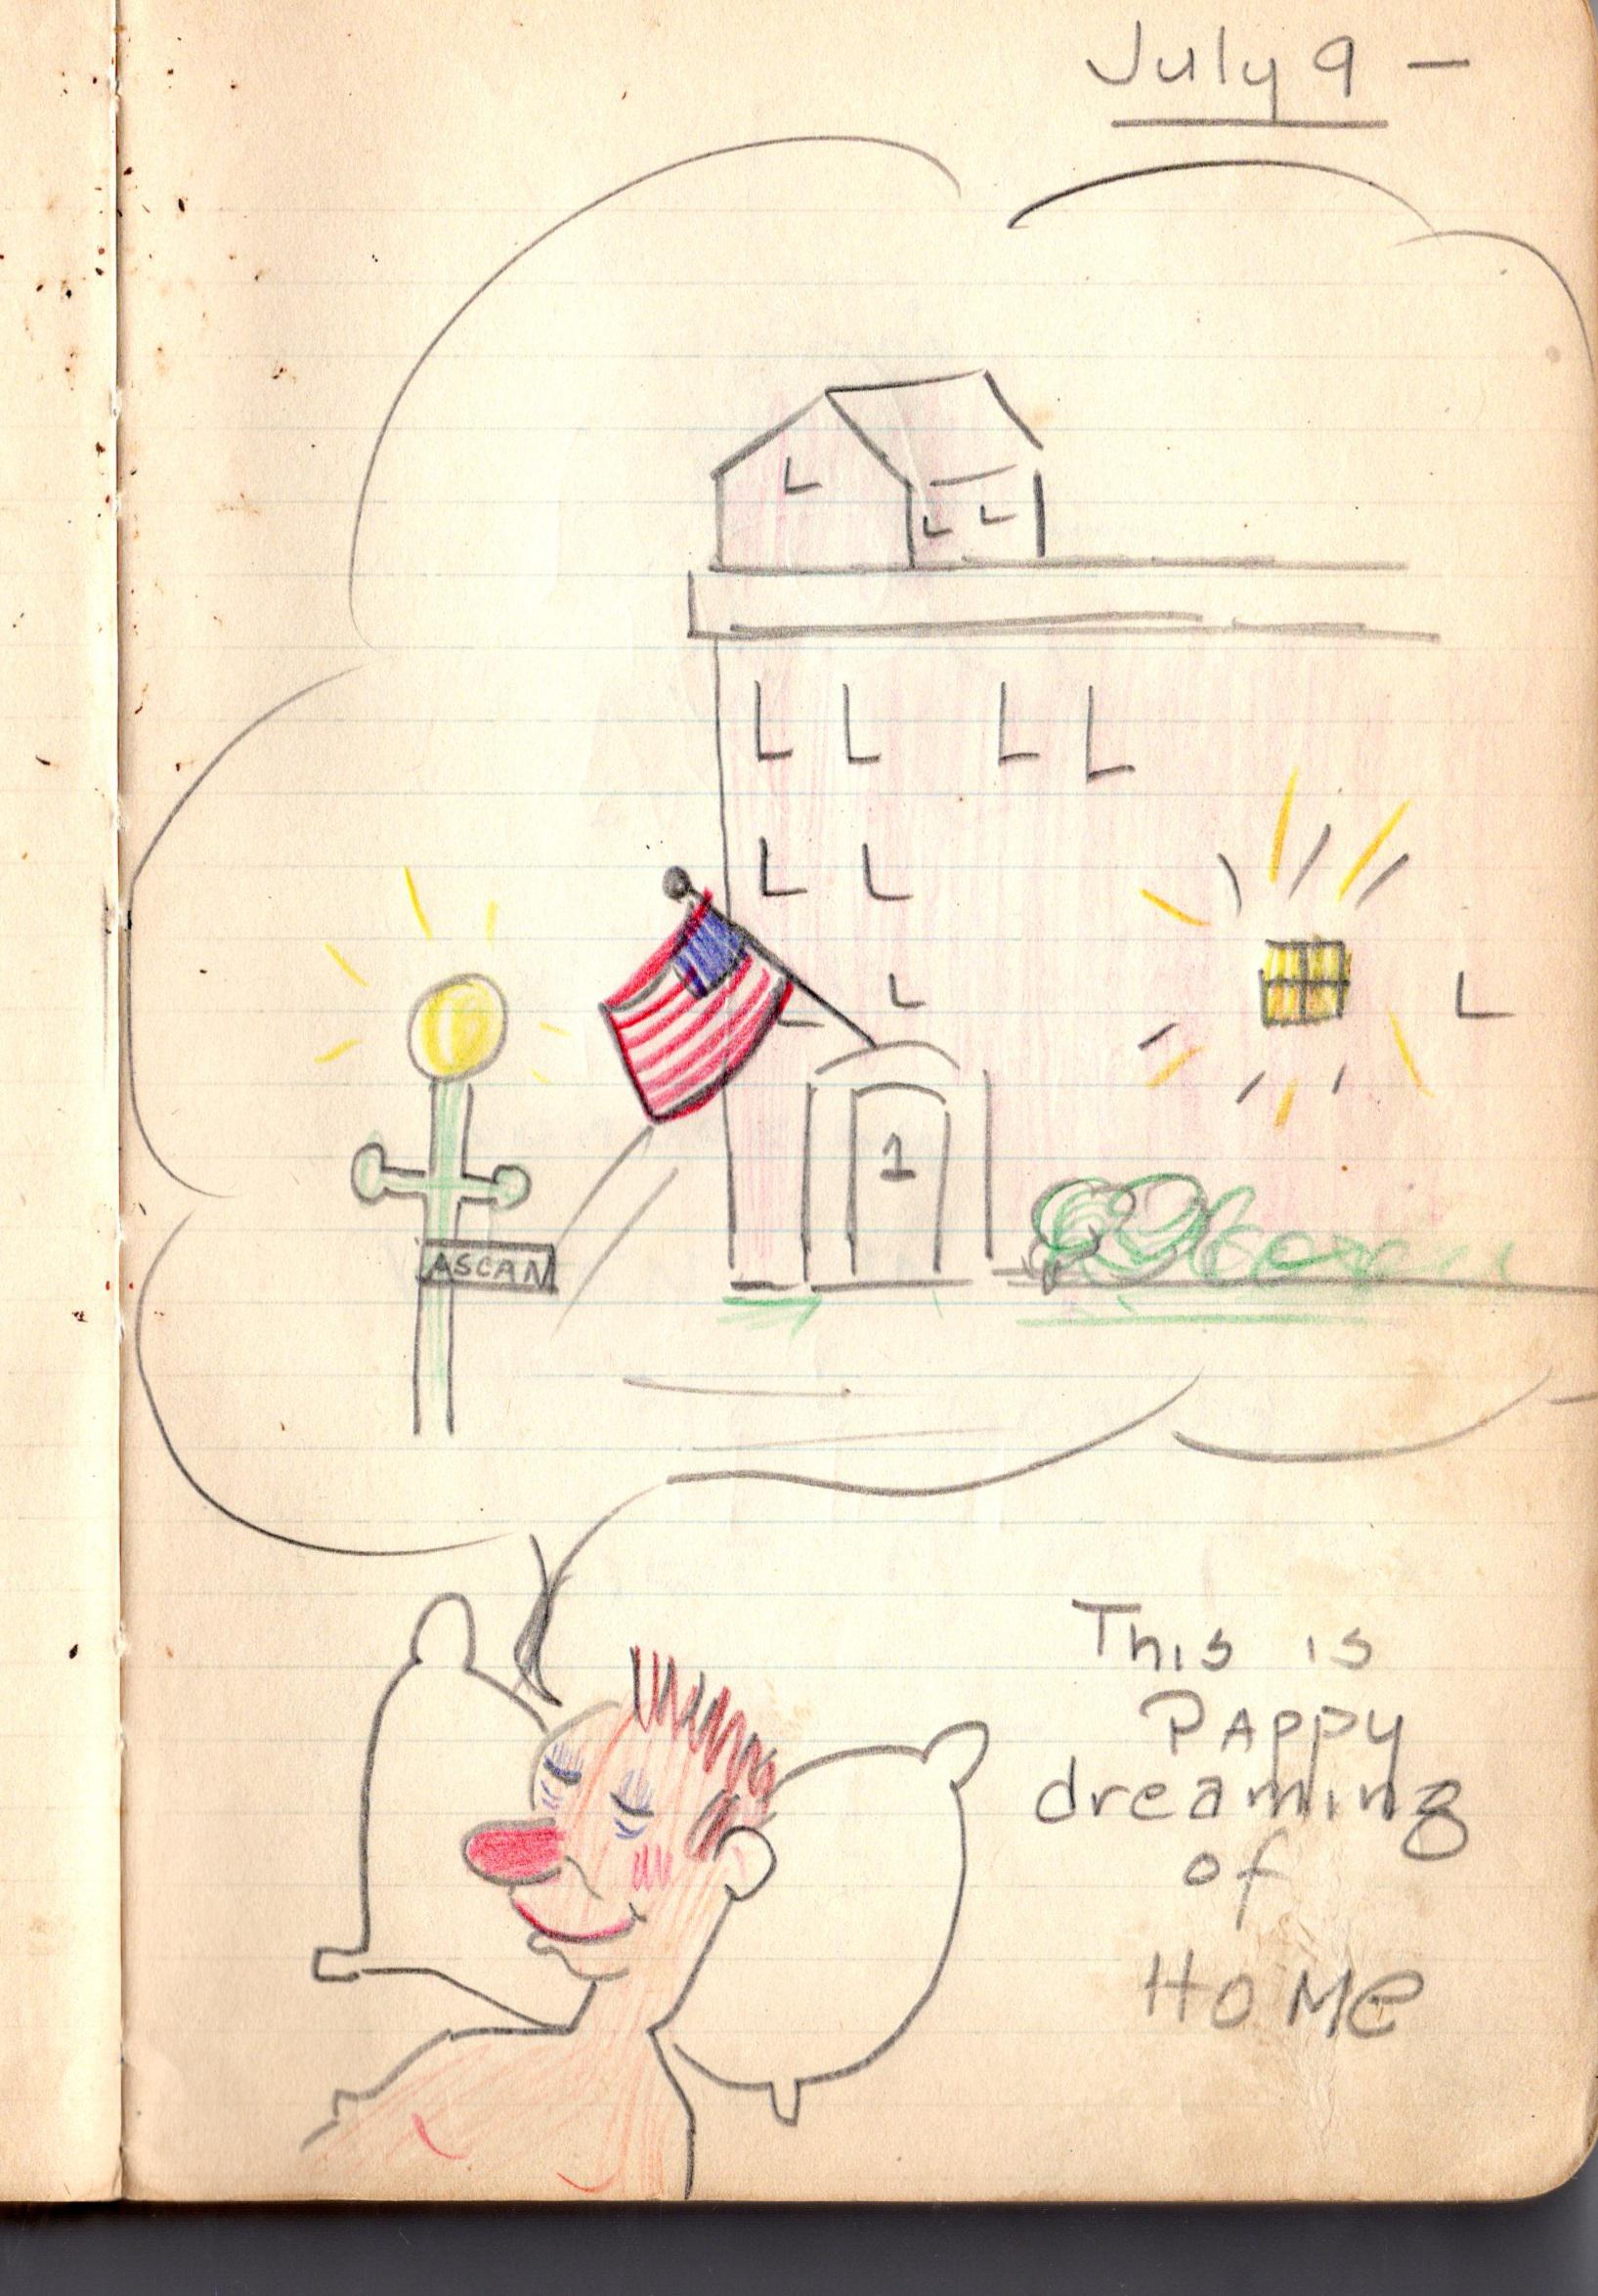 My Great-grandfathers cartoon of himself dreaming of home while serving as Chief Engineer aboard the USS Philadelphia during WW2. July 9th 1943.jpg